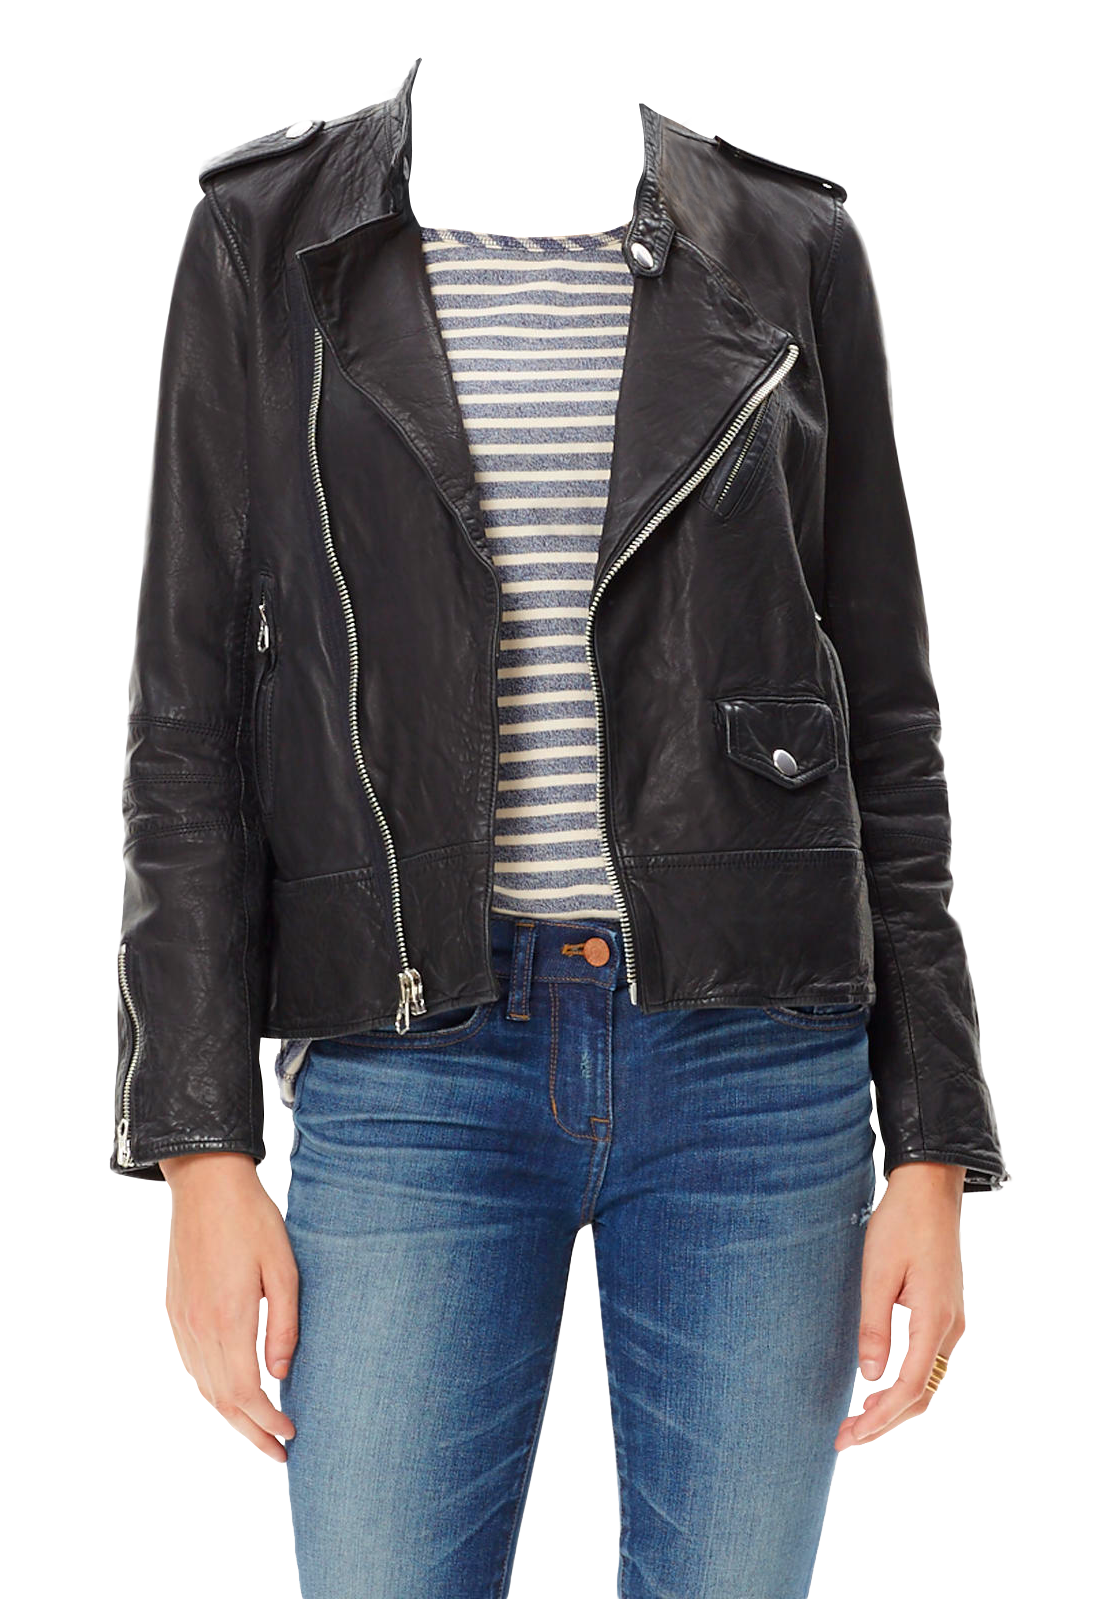 Women Jacket PNG Image with Transparent Background